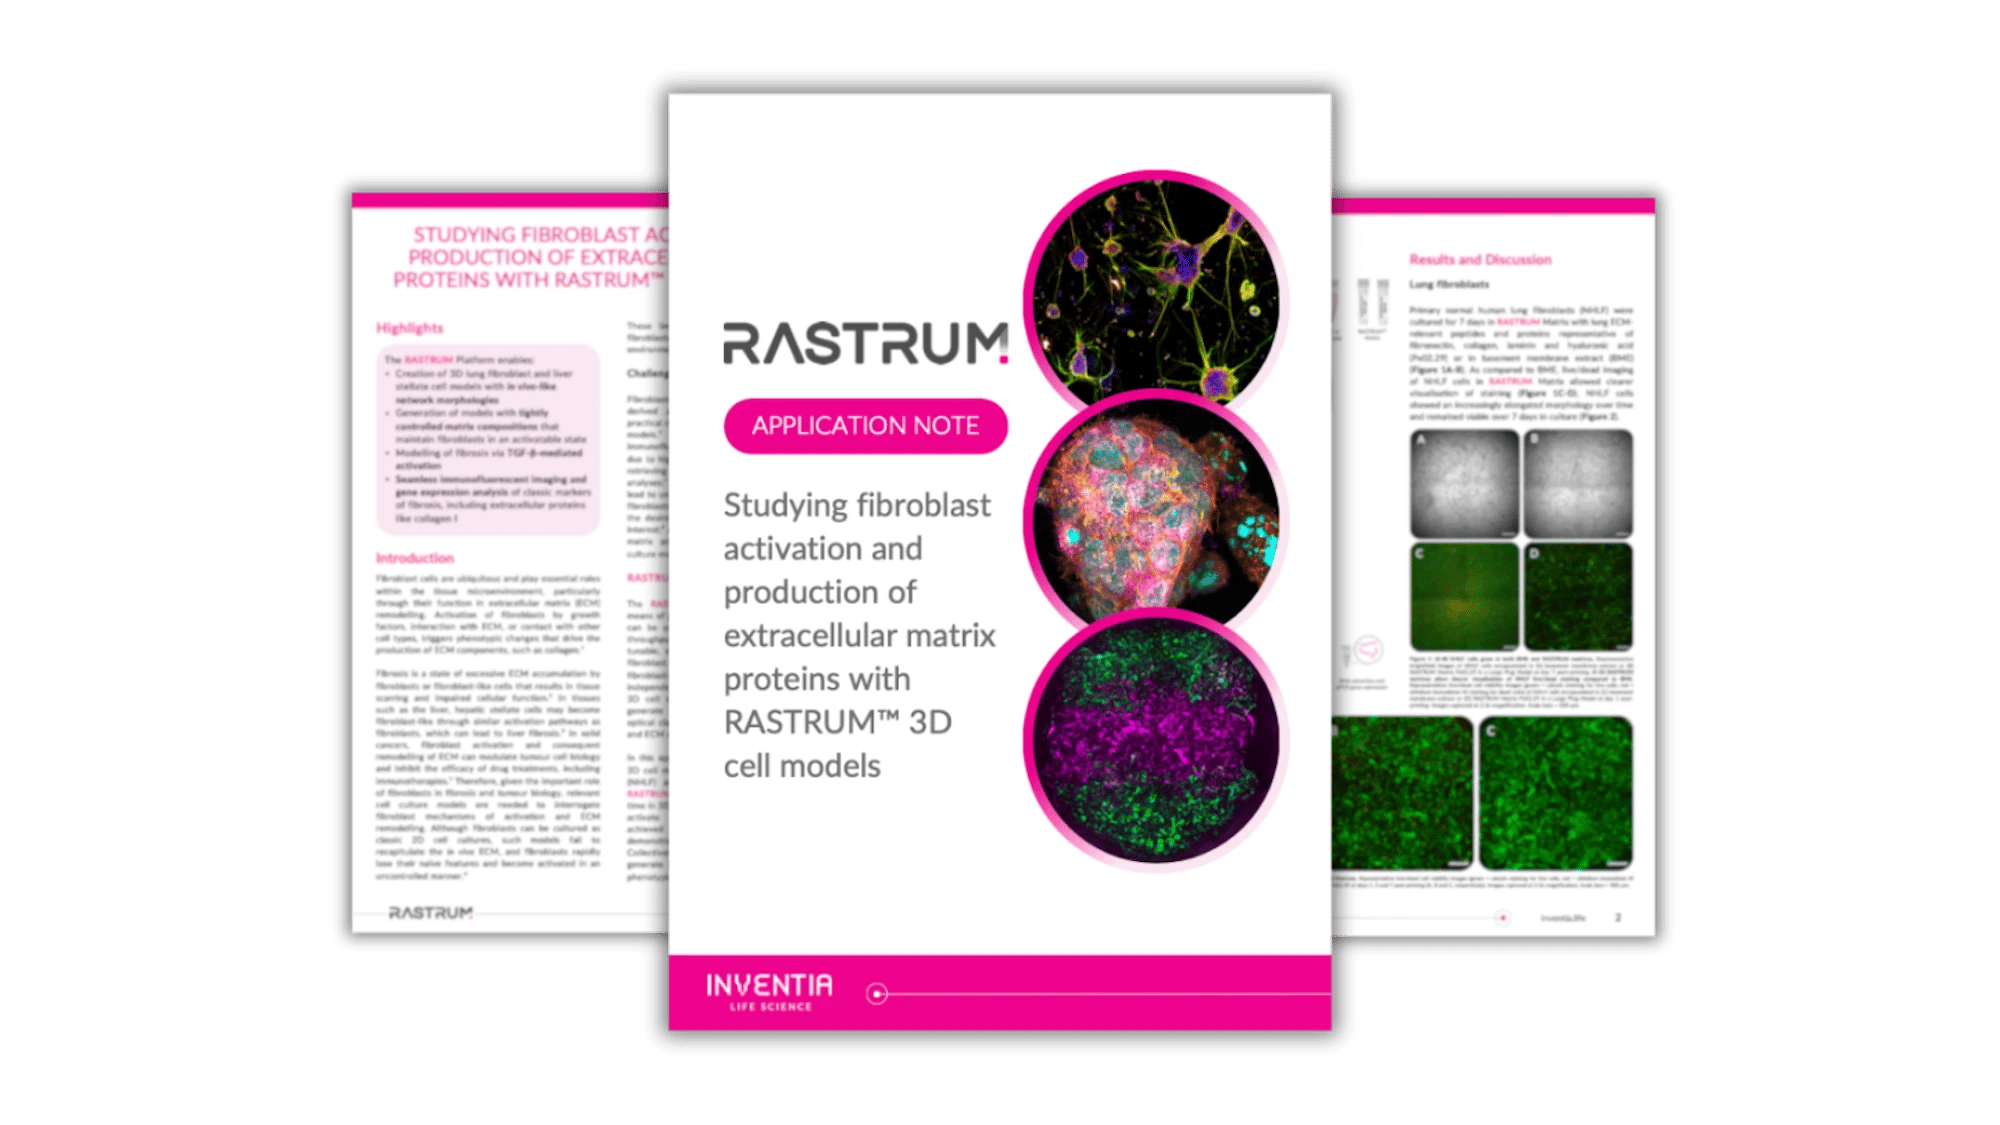 inventia-fibroblast-activation-with-rastrum-3d-cell-models-application-note